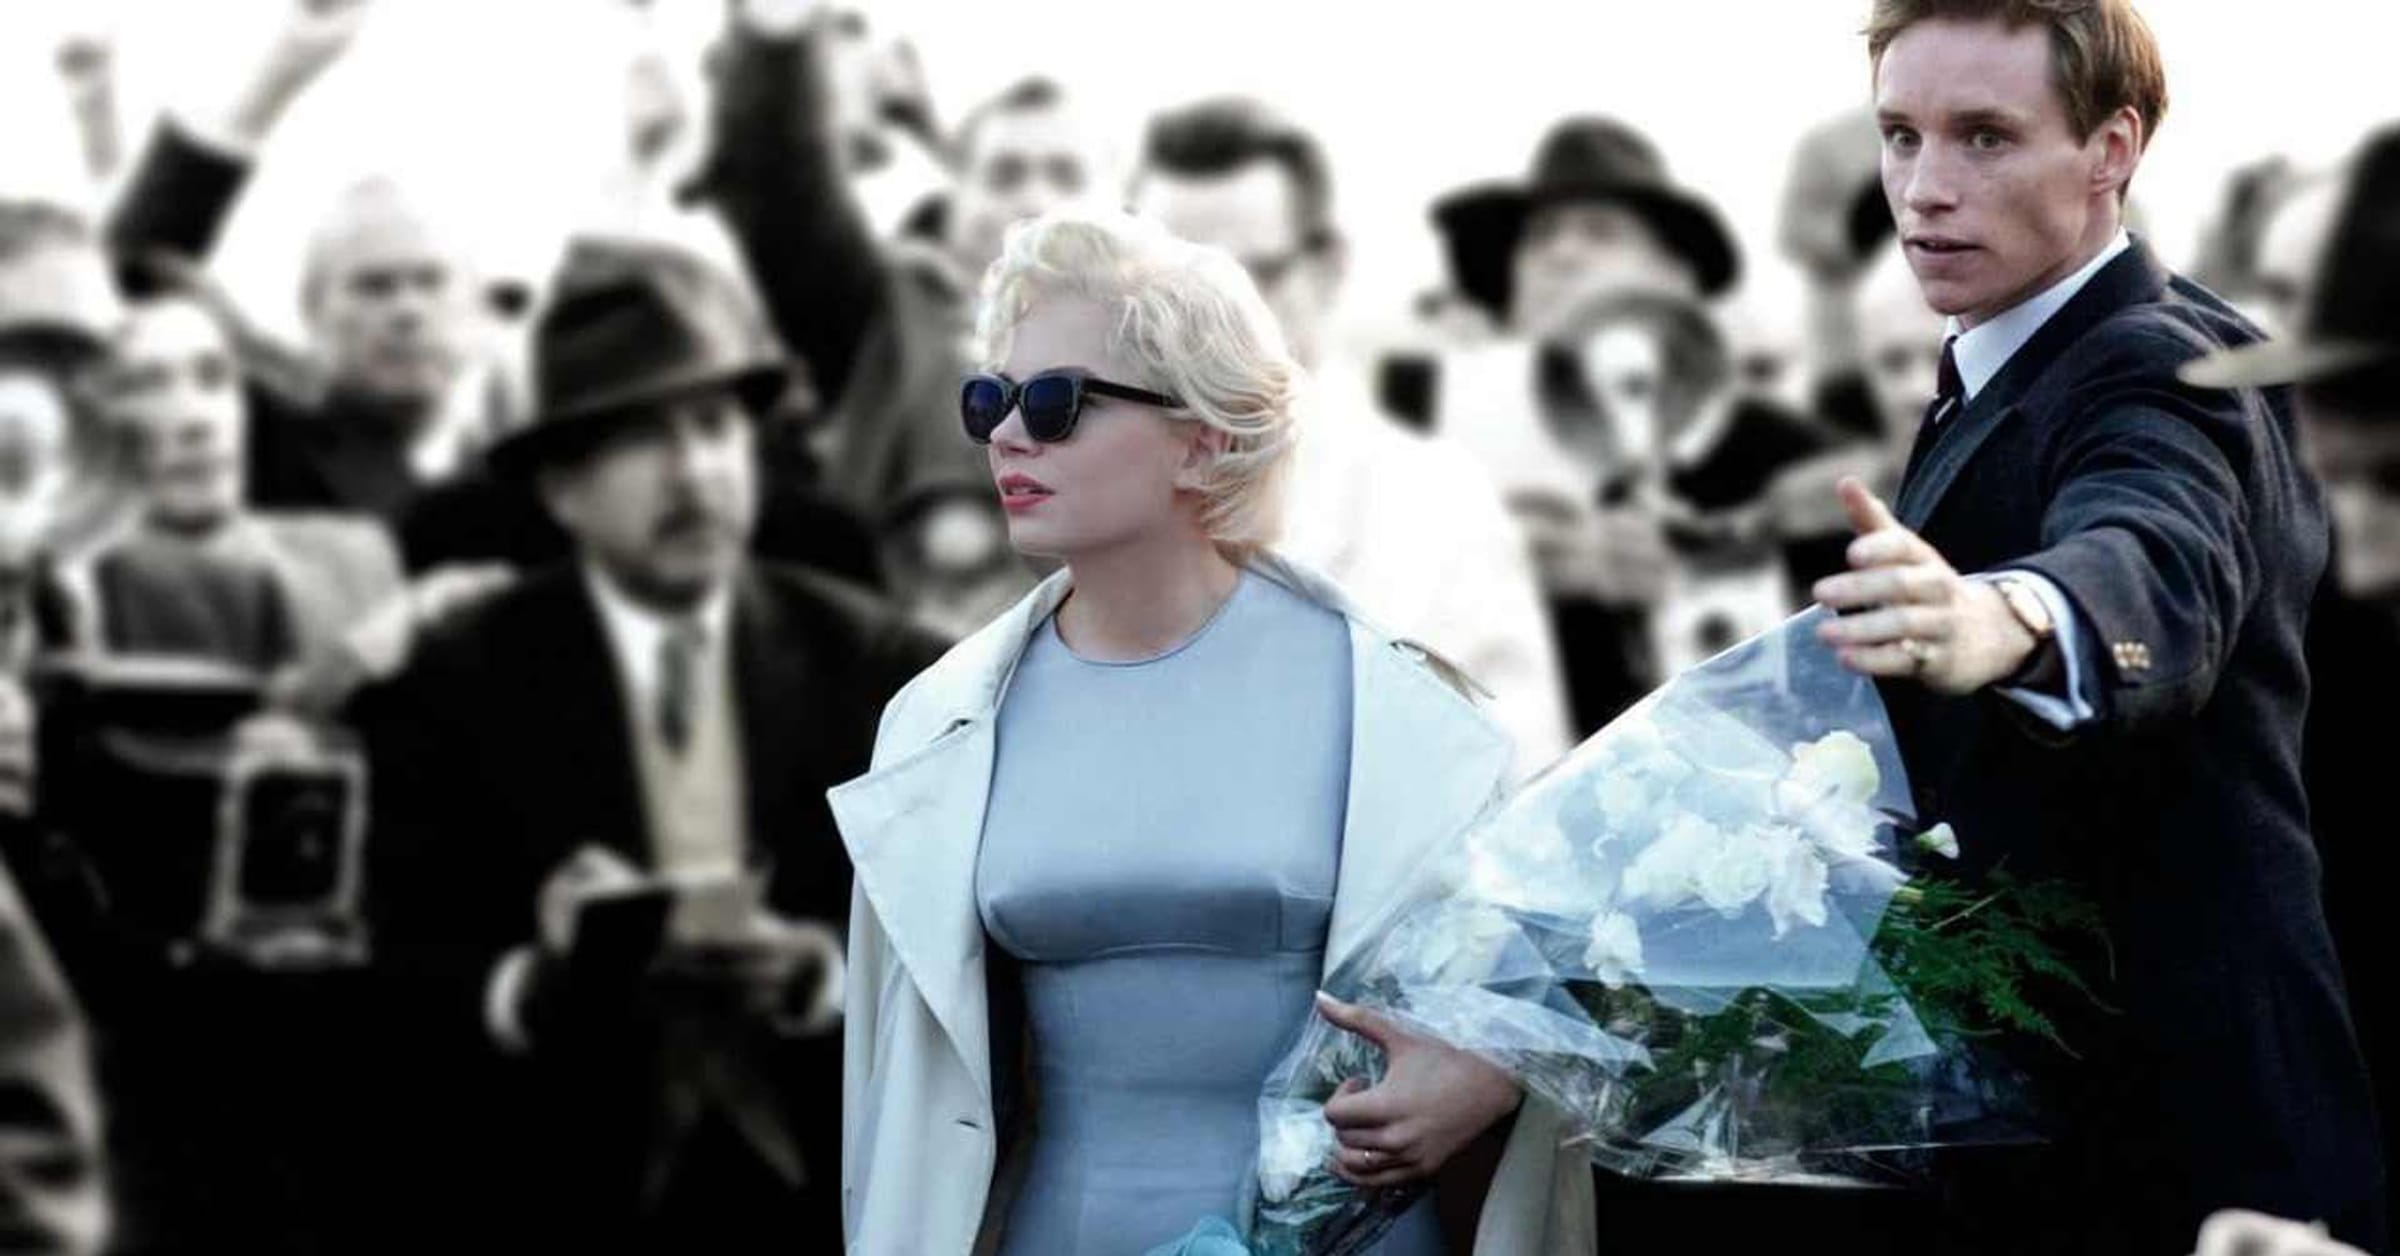 Marilyn Monroe's Best Movies Ranked, According to Critics